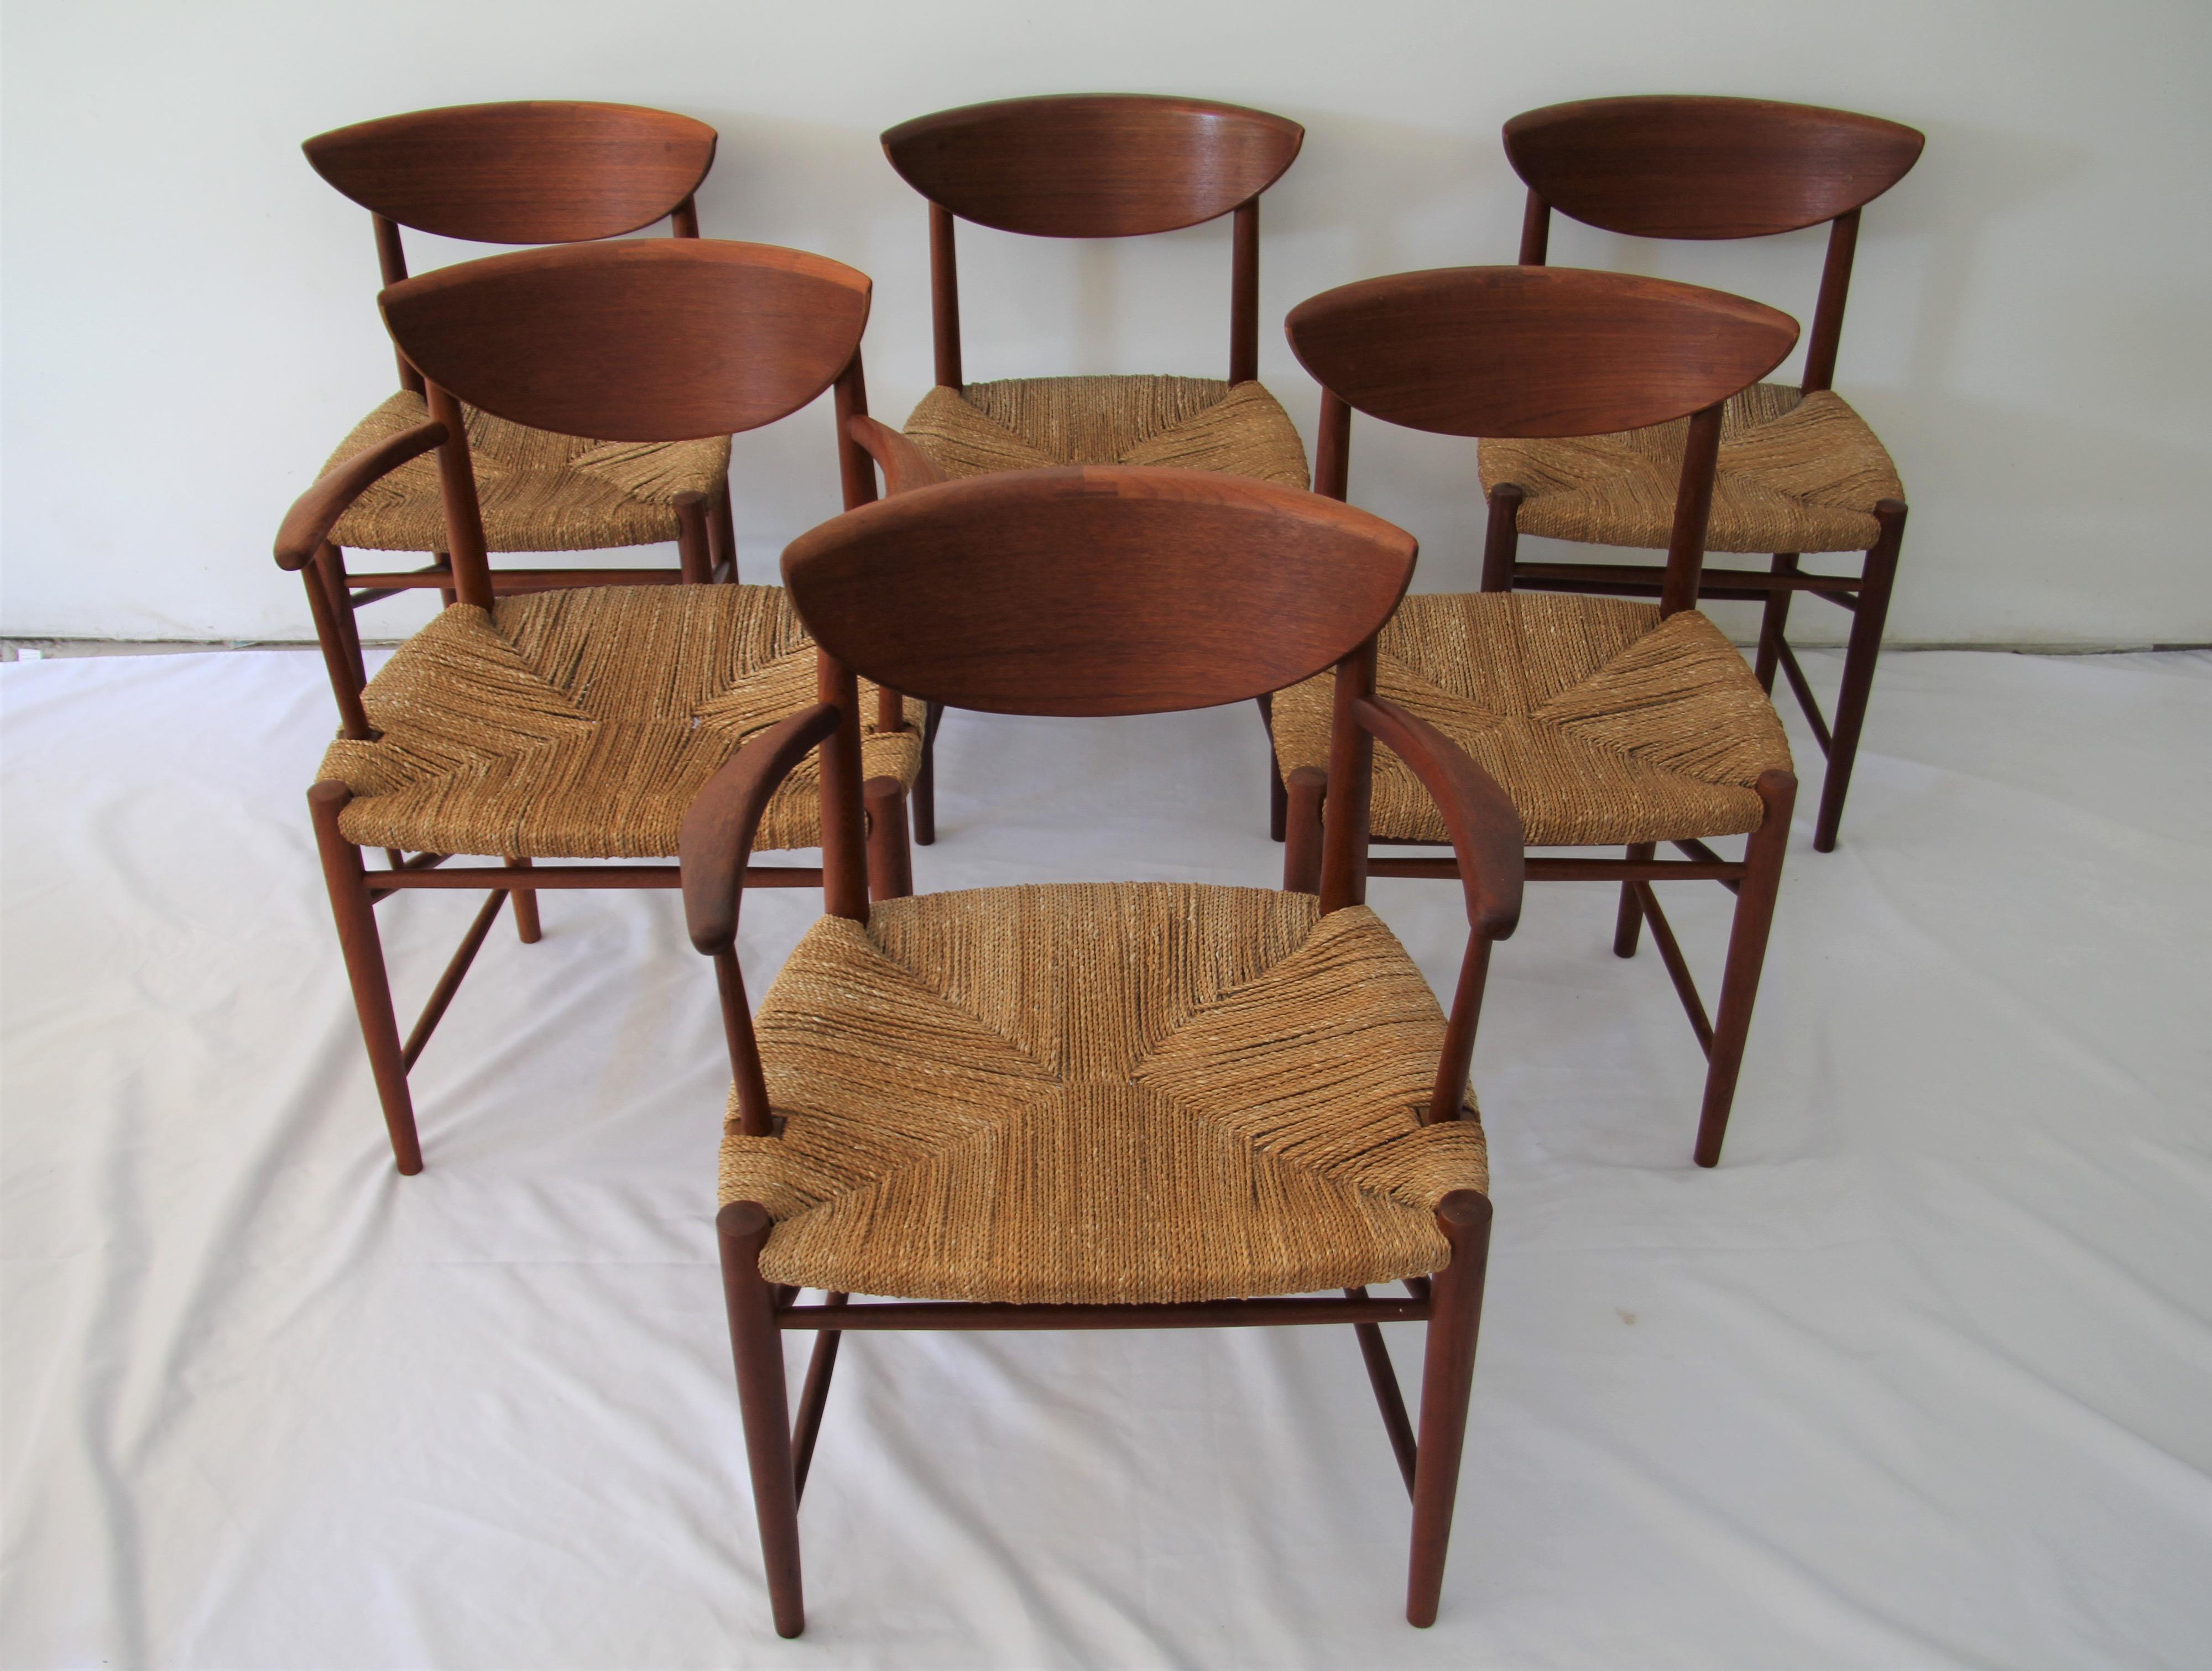 Set of six Peter Hvidt and Orla Mølgaard-Nielsen for Soborg Mobler model 316 dining chairs includes 2 armchairs and 4 side chairs. These sculpted chairs are made of teak with rush seats that are intact with no loose cords or staining. Chairs have